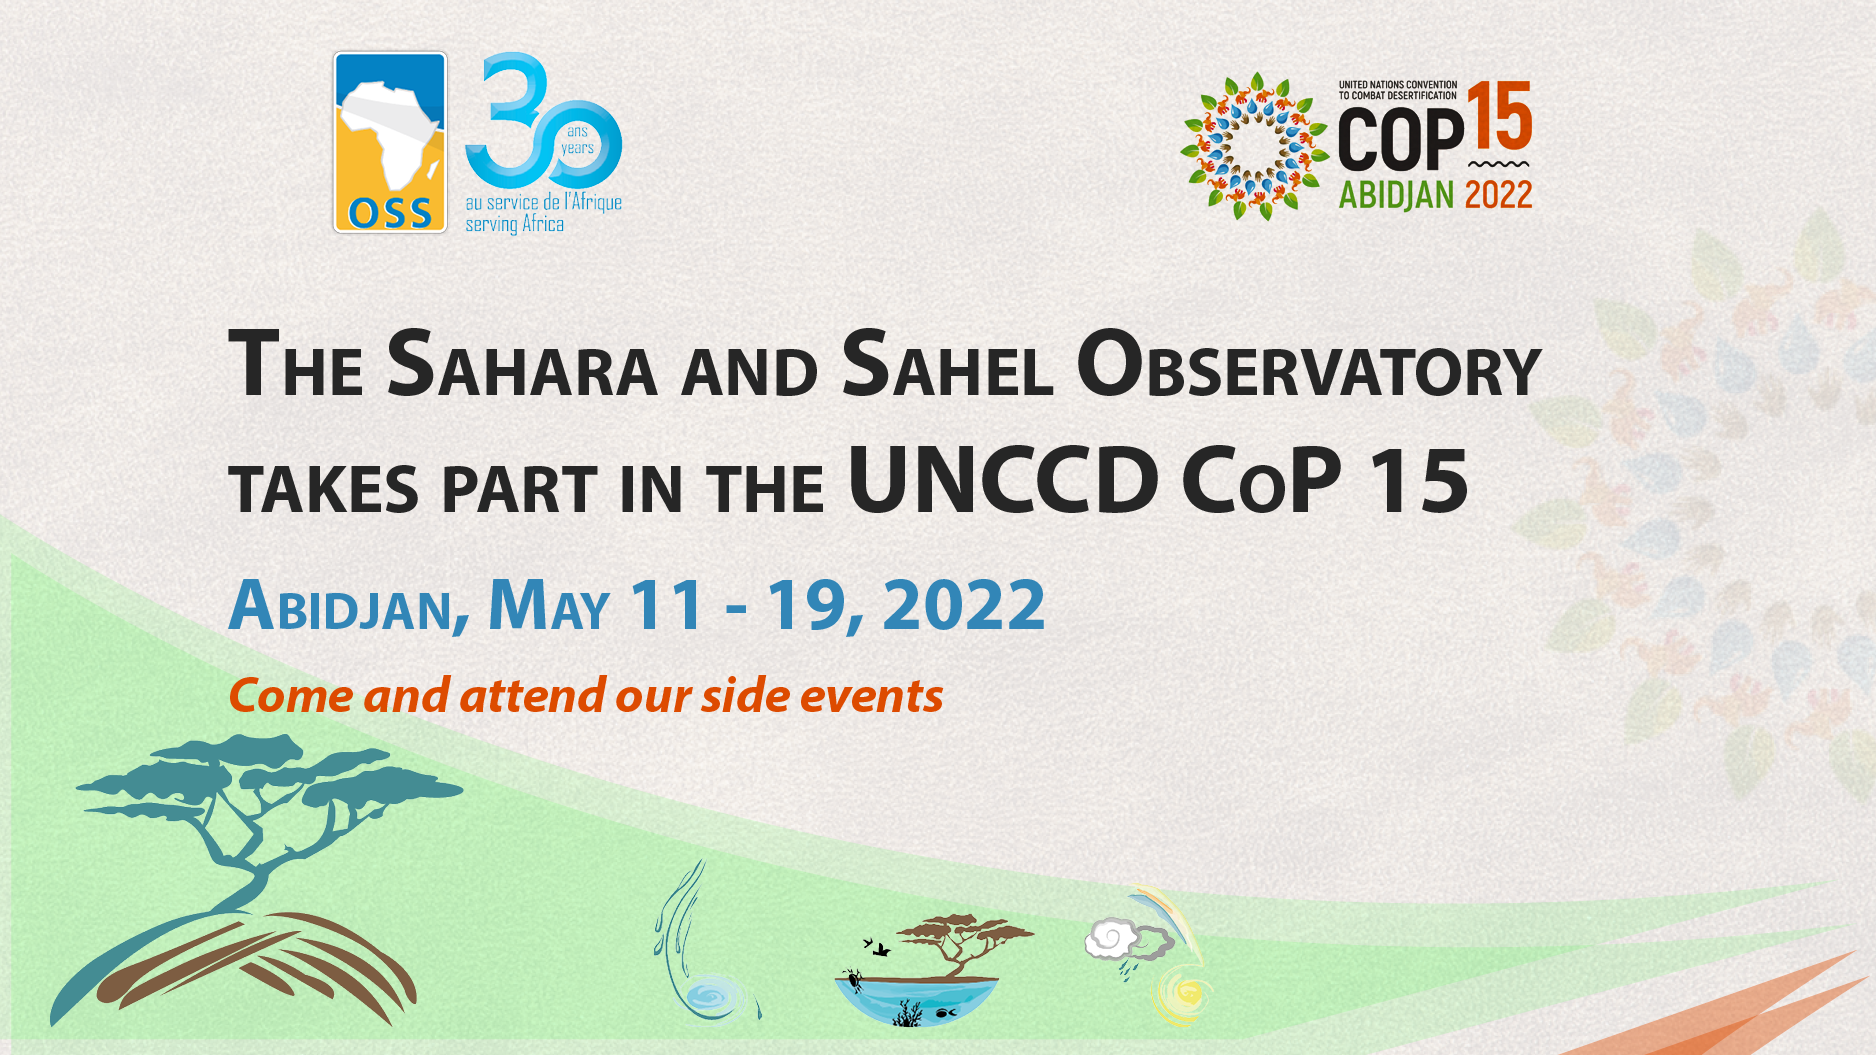  The Sahara and Sahel Observatory takes part in the 15th session of the Conference of the Parties (COP15) of the United Nations Convention to Combat Desertification - Abidjan - Côte d'Ivoire, May 11 - 19, 2022